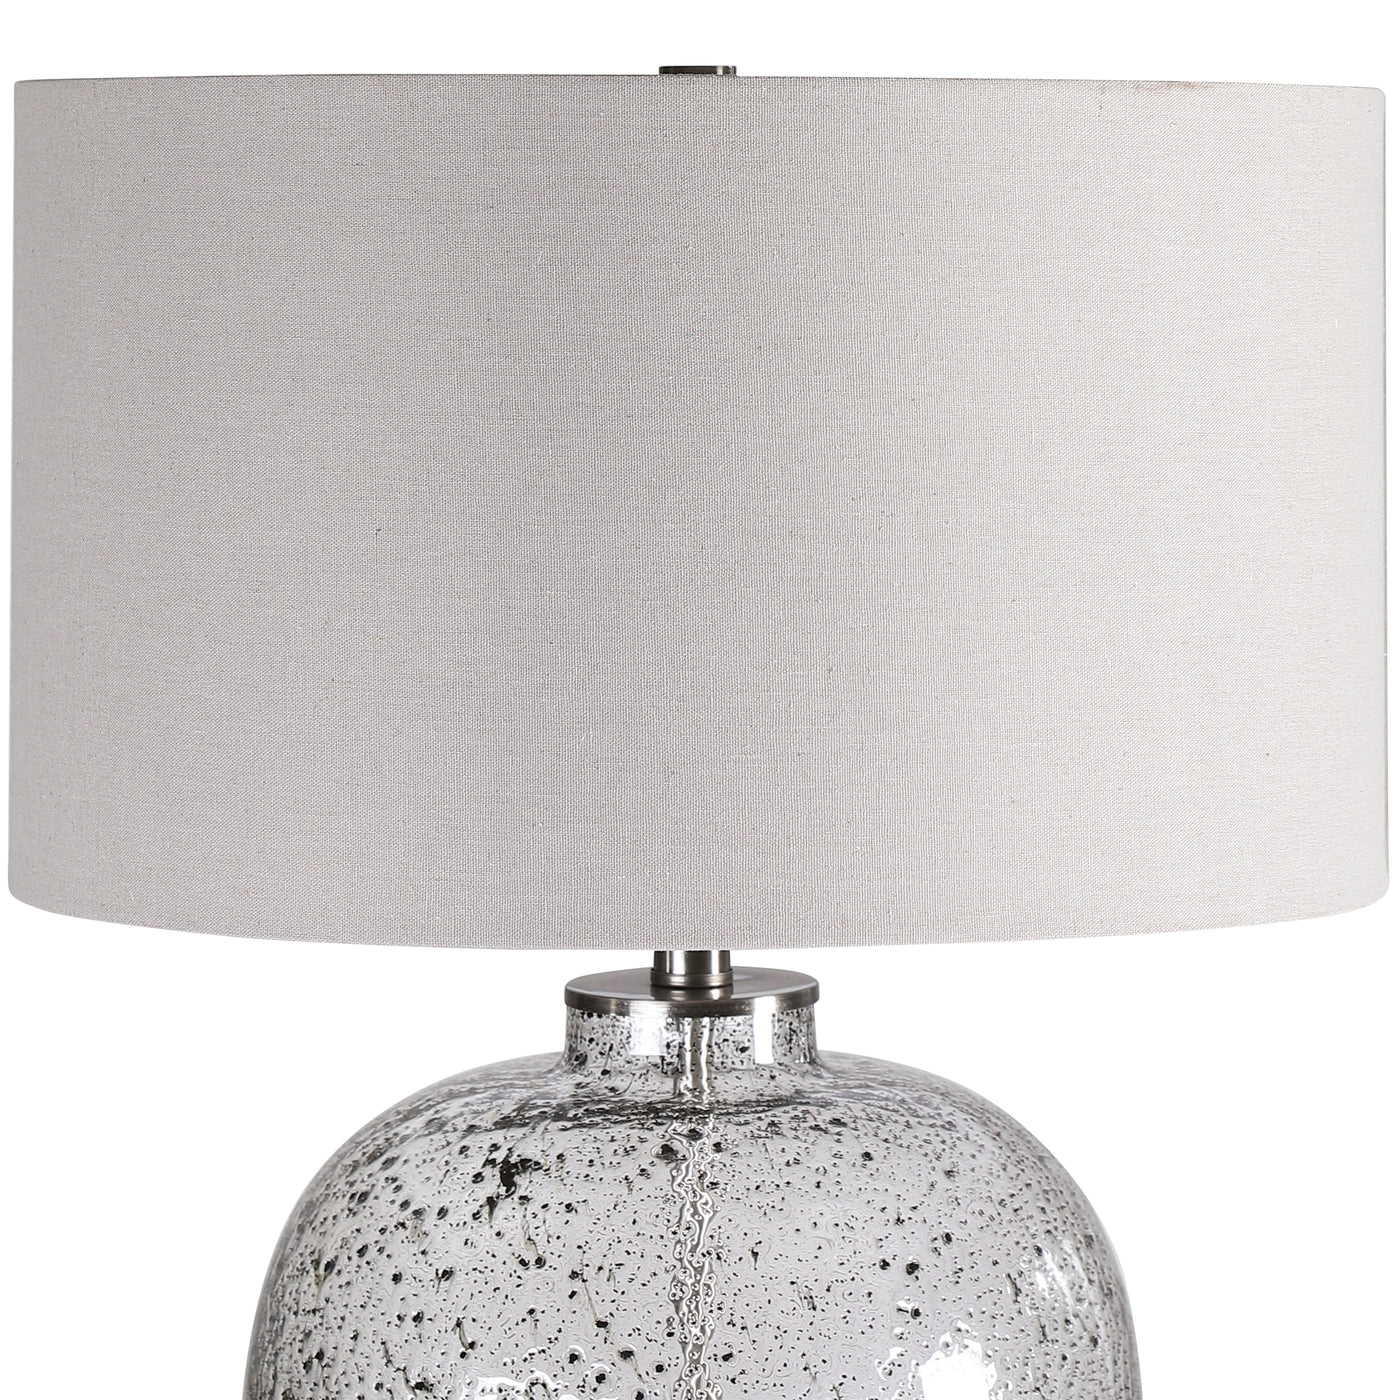 Modern Style Table Lamp Features A Translucent Art Glass Base With Abstract Black Flecks Throughout, Accented With Brushed...